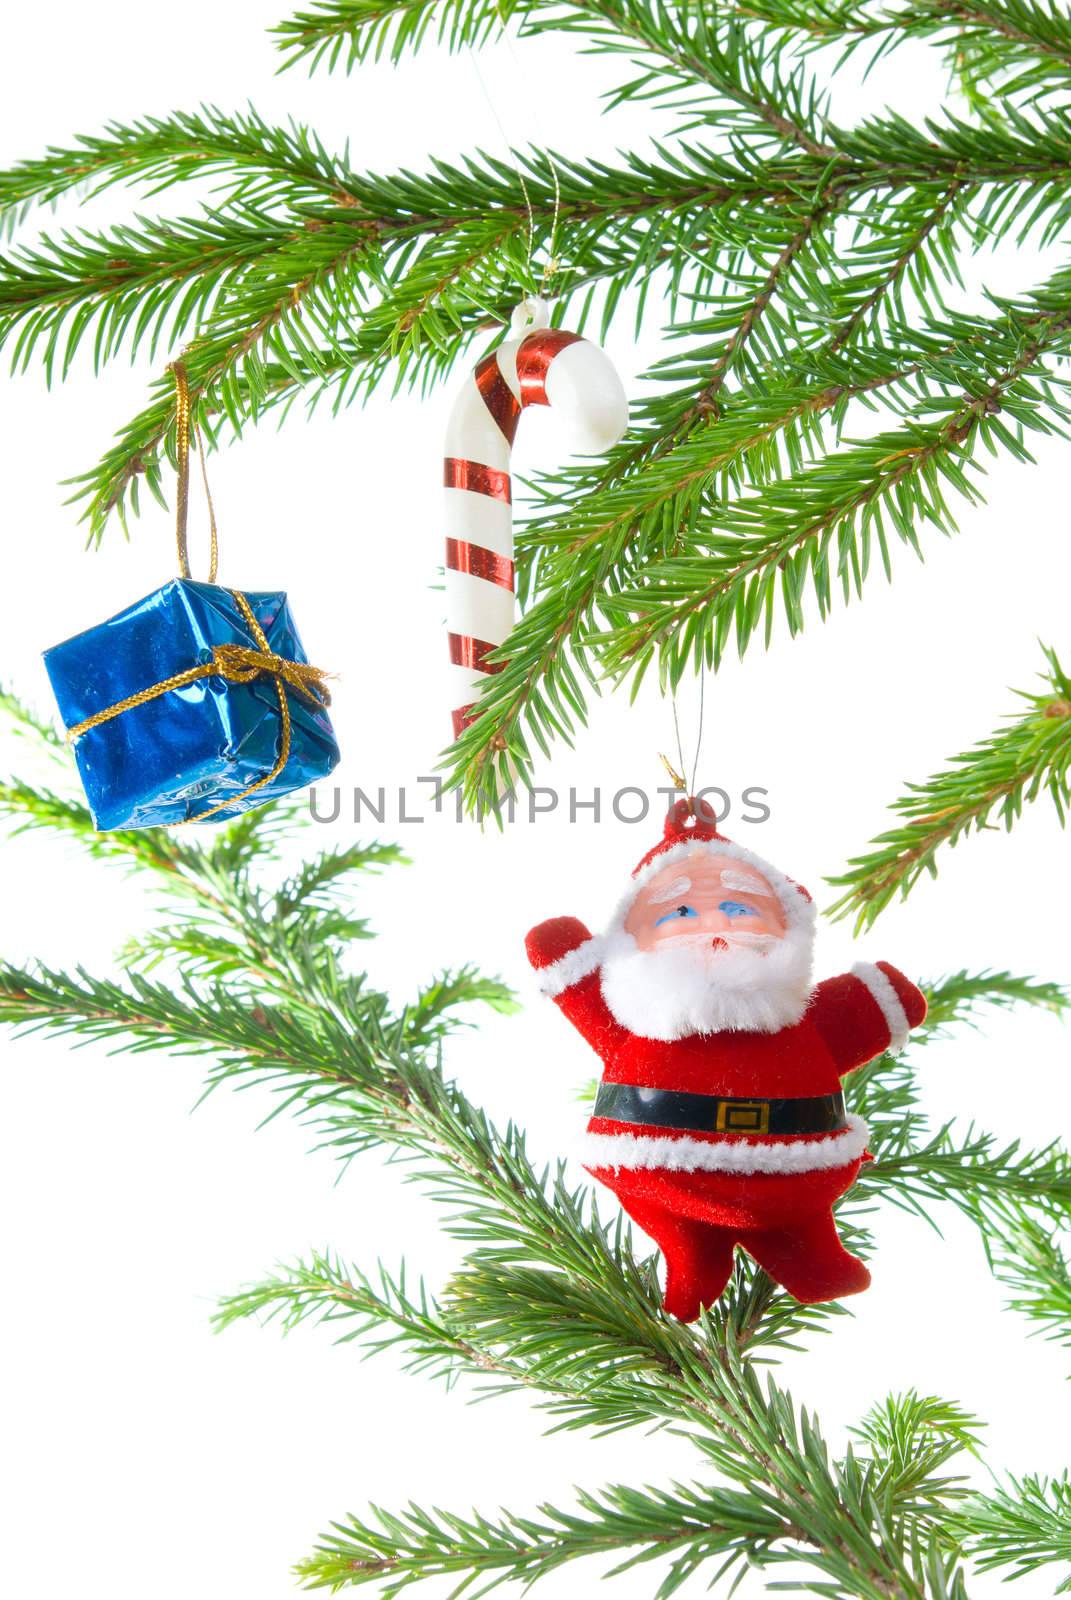 santa claus ,Christmas bauble  on background of the fur branches